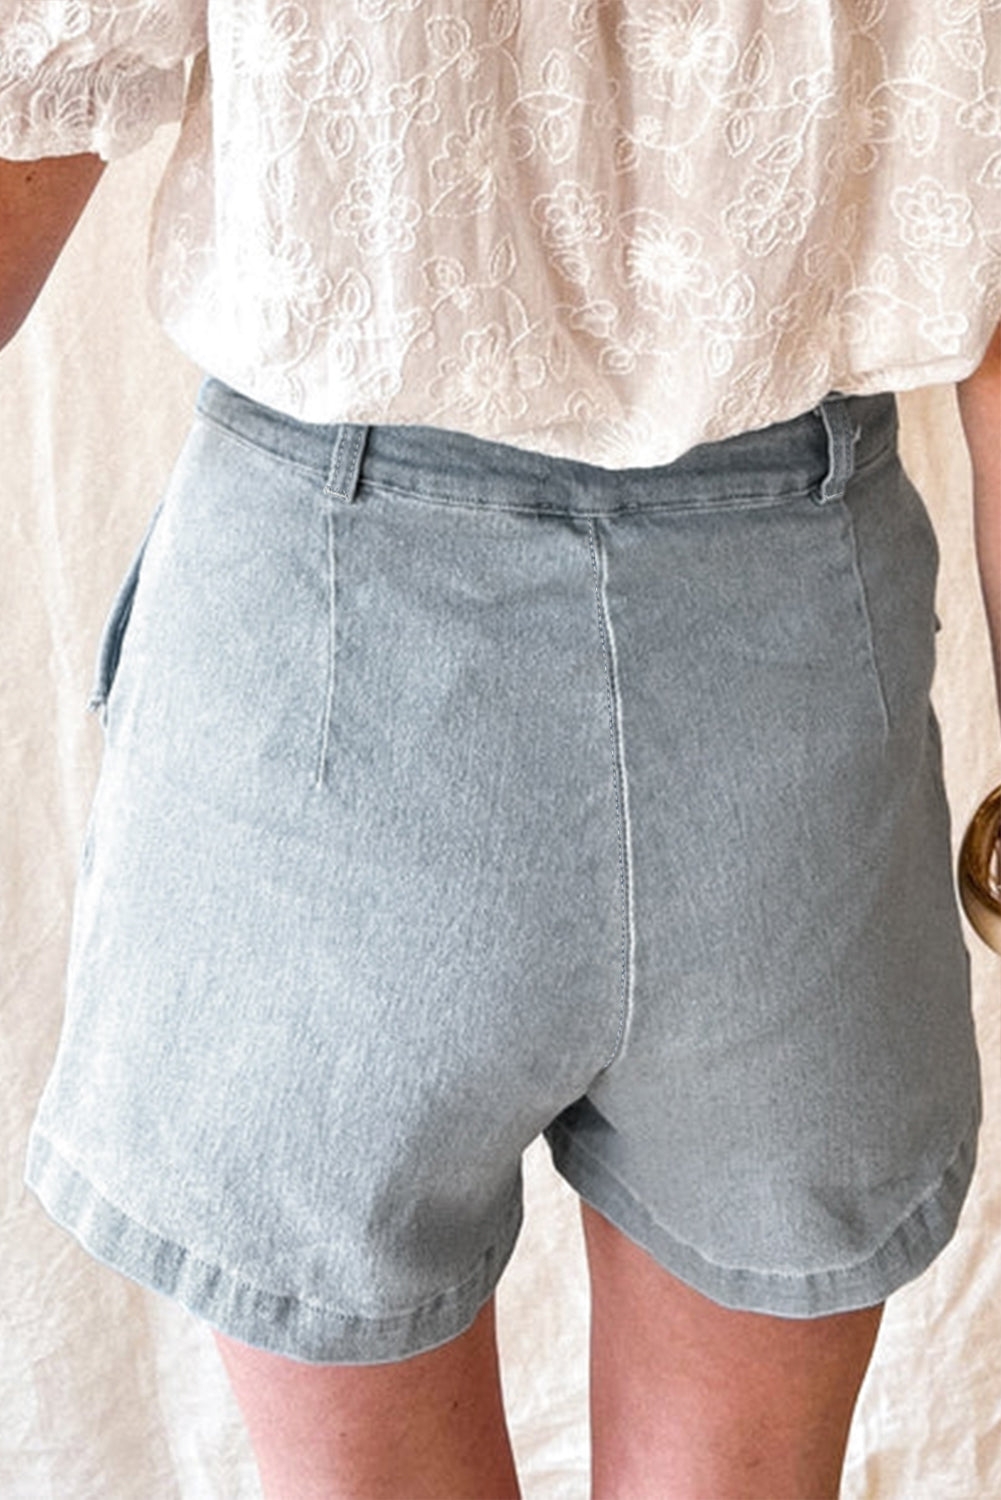 Trendy and practical women's jean shorts with a high waist, ruffled detailing, and convenient flap pockets.